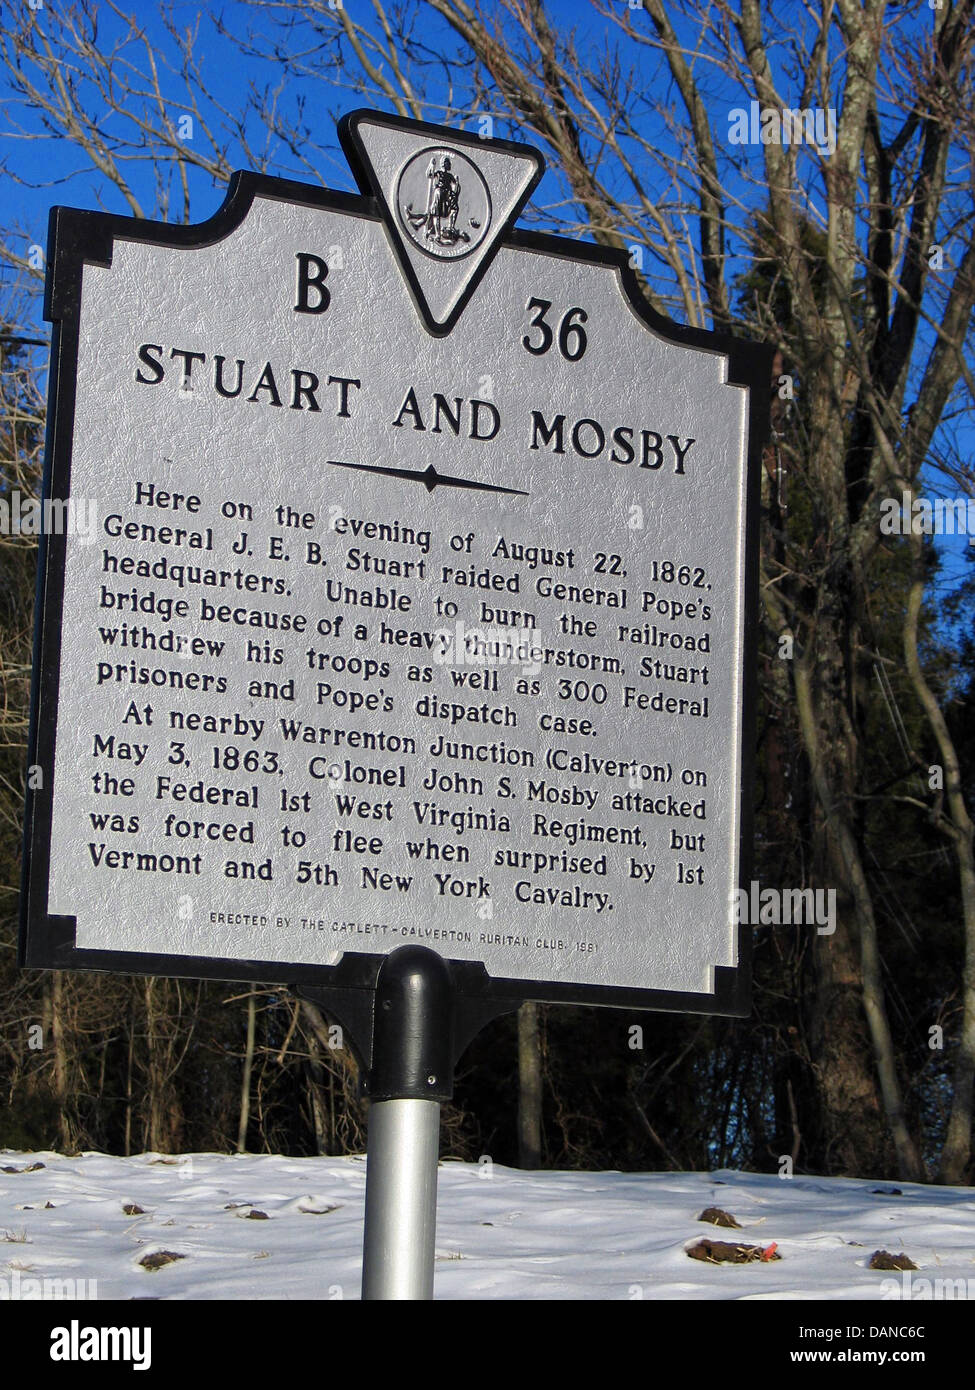 STUART AND MOSBY Here on the evening of August 22, 1862, General J.E.B. Stuart raided General Pope's headquarters. Unable to burn the railroad bridge beacuse of a heavy thunderstorm, Stuart withdrew his troops as well as 300 Federal prisoners and Pope's dispatch case. At nearby Warrenton Junction (Calverton) on May 3, 1863, Colonel John S. Mosby attacked the Federal 1st West Virginia Regiment, but was forced to flee when surprised by the 1st Vermont and 5th New York Cavalry. Erected by the Catlett-Calverton Ruritan Club, 1981 Stock Photo